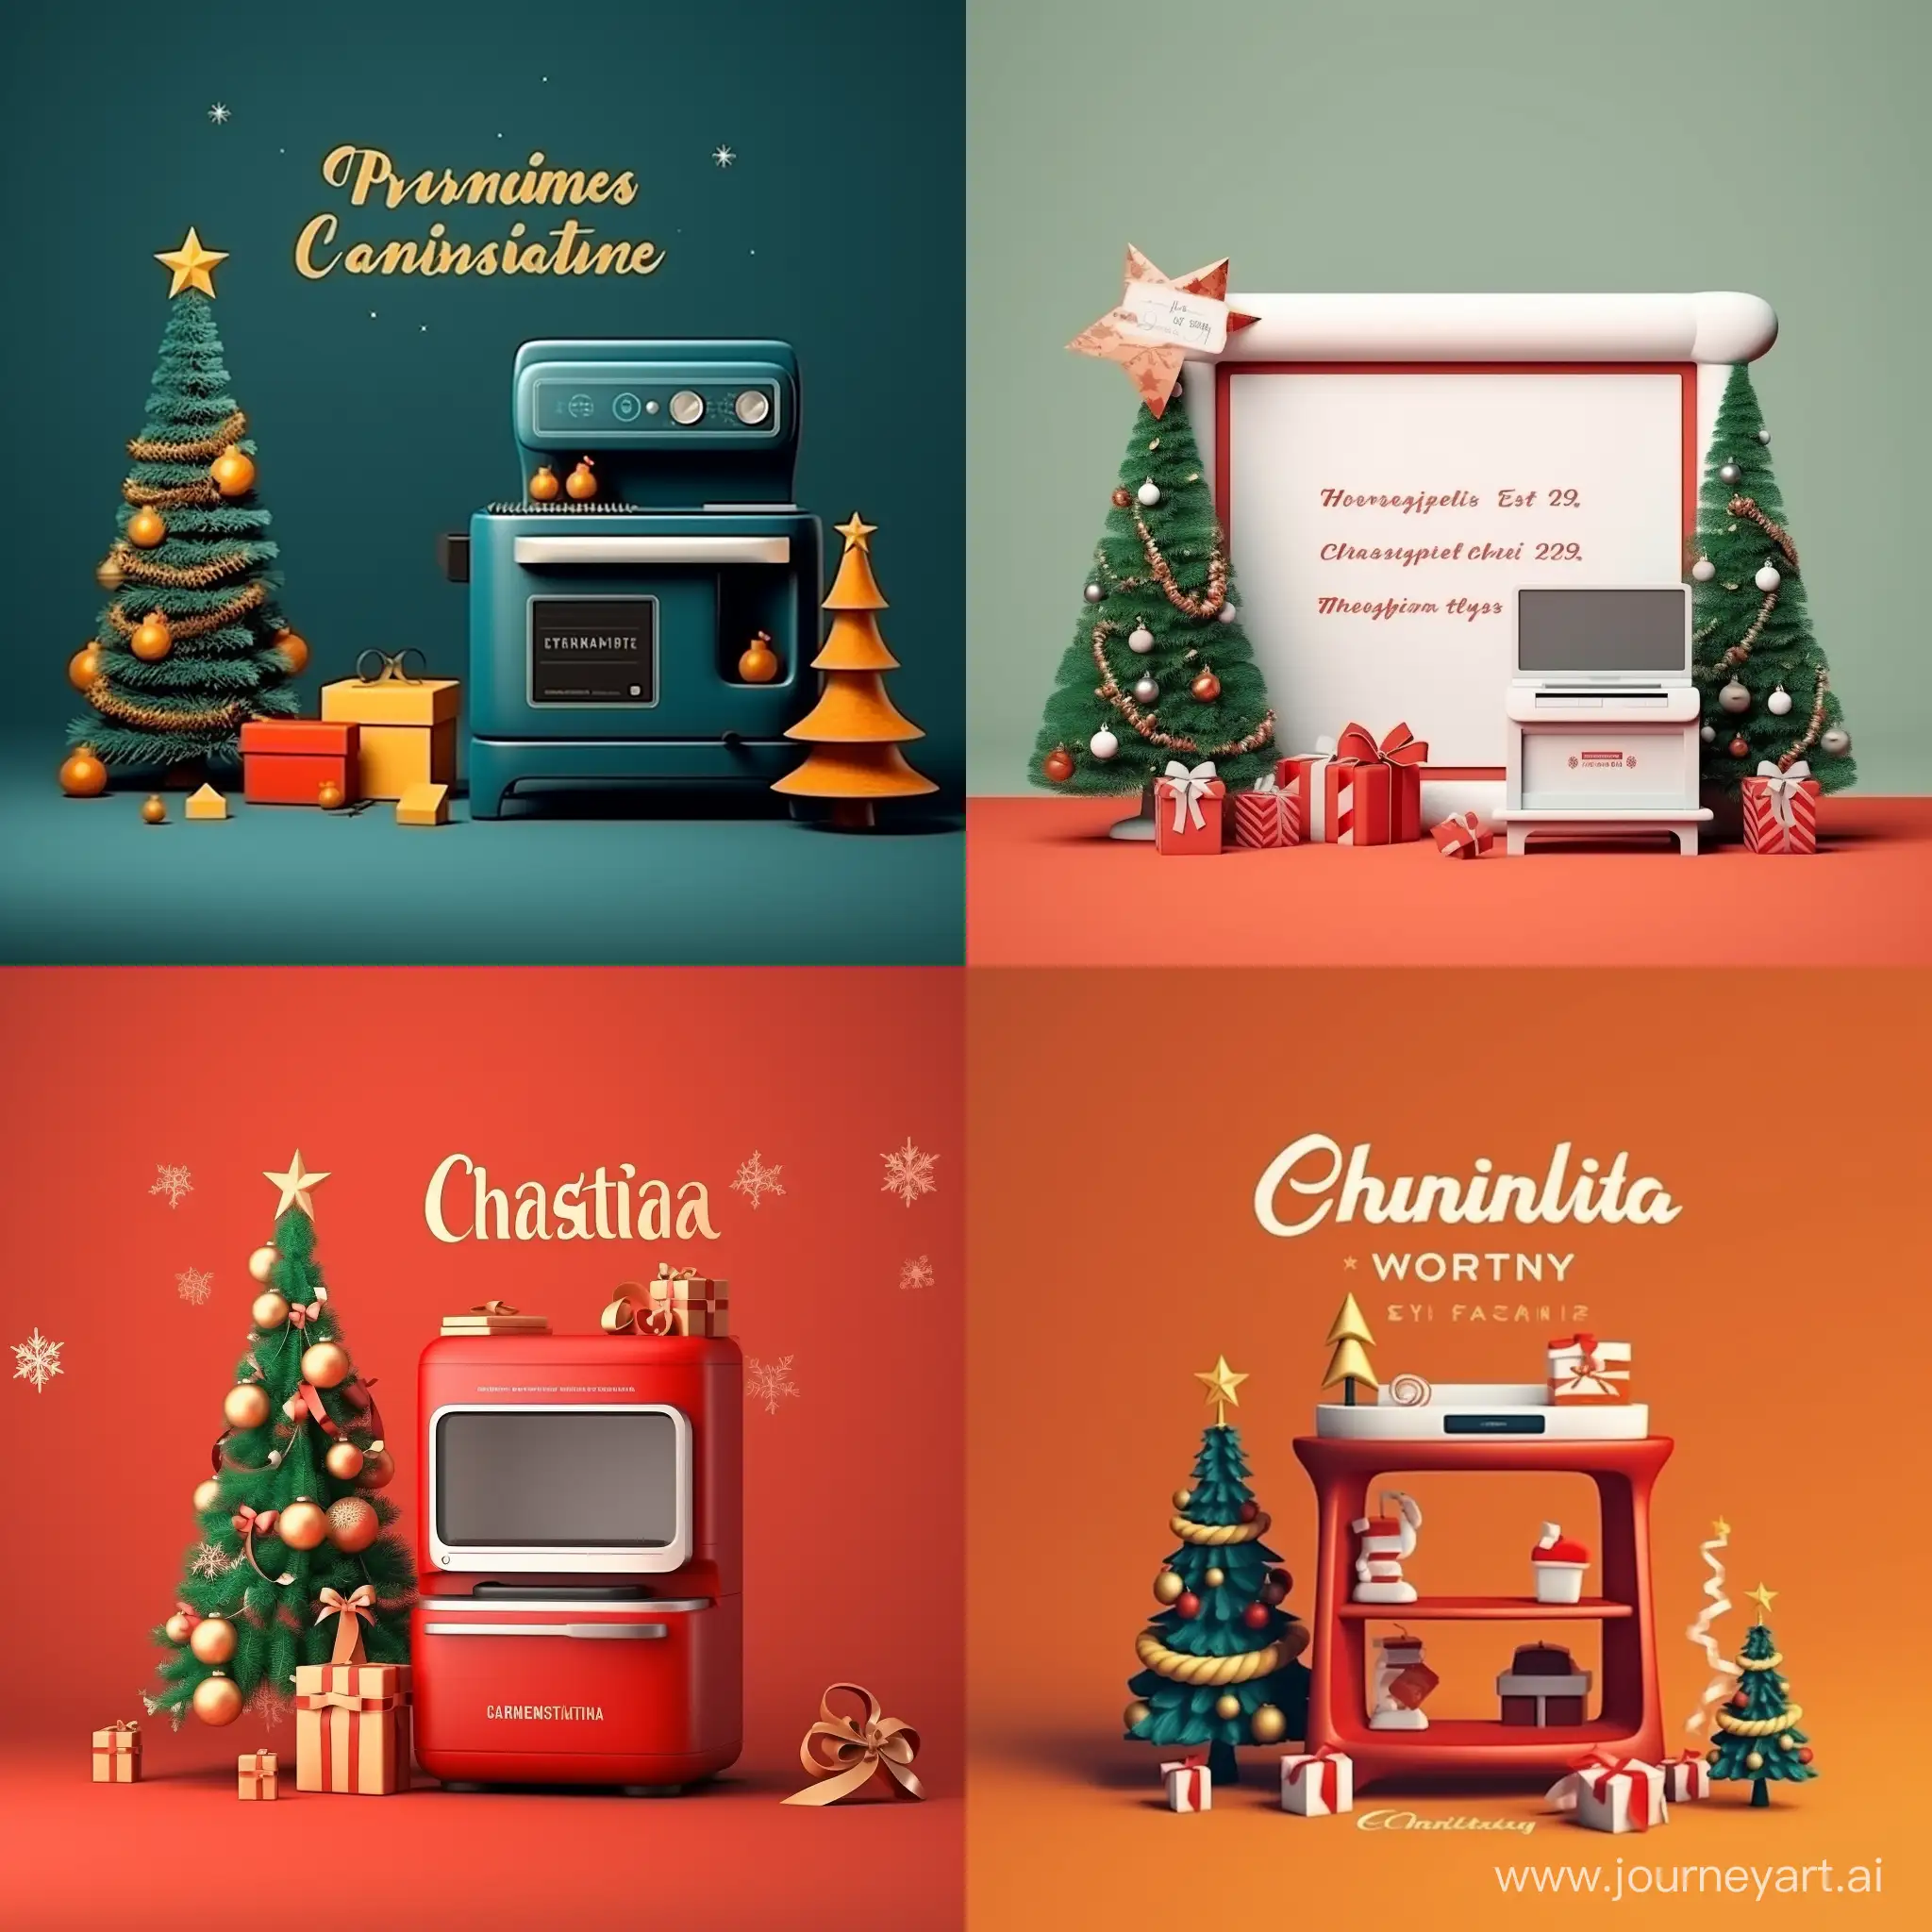 Festive-3D-Printing-Delight-Christmas-Promotion-at-Online-Store